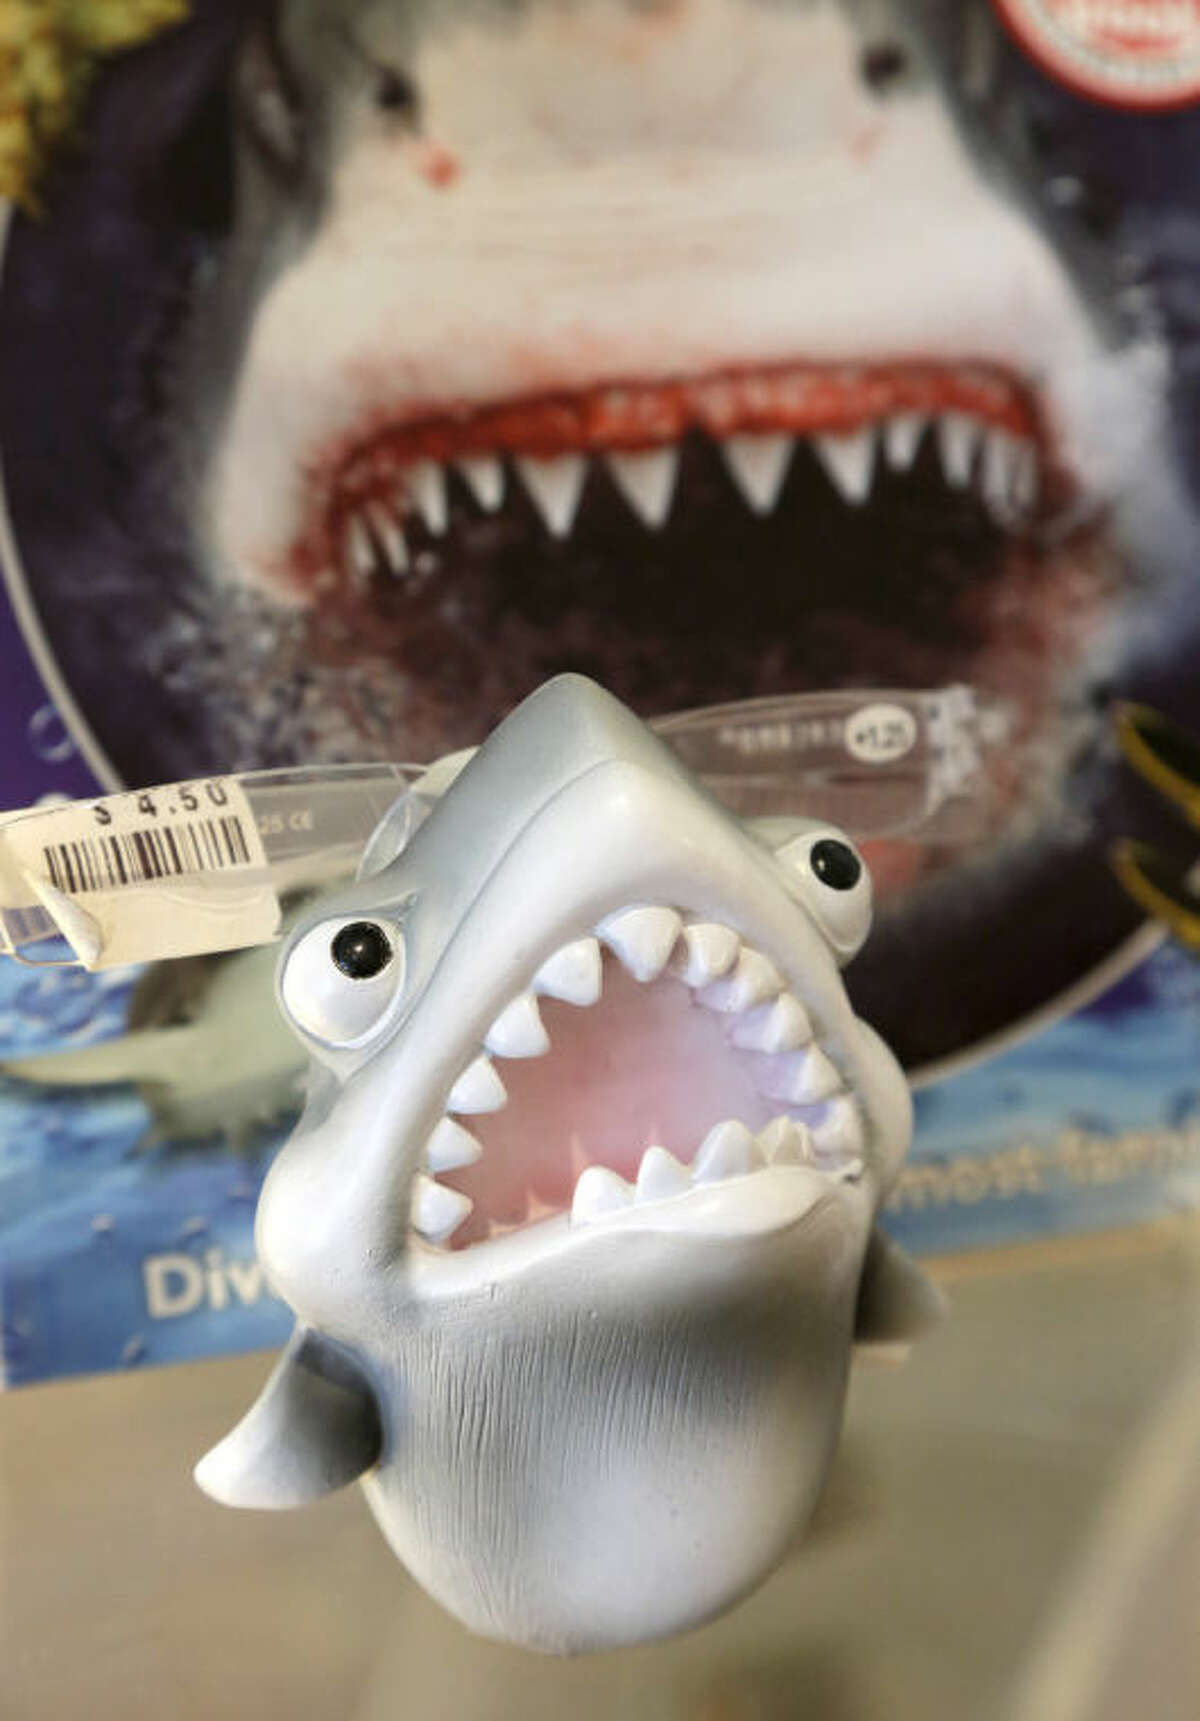 In this July 2, 2014 photo, an eye glass holder in the shape of a shark rests on a shelf in a souvenir shop in Chatham, Mass. With growing sightings of great white sharks off Cape Cod, local entrepreneurs are feeding the frenzy with their shark-themed memorabilia and apparel. (AP Photo/Steven Senne)